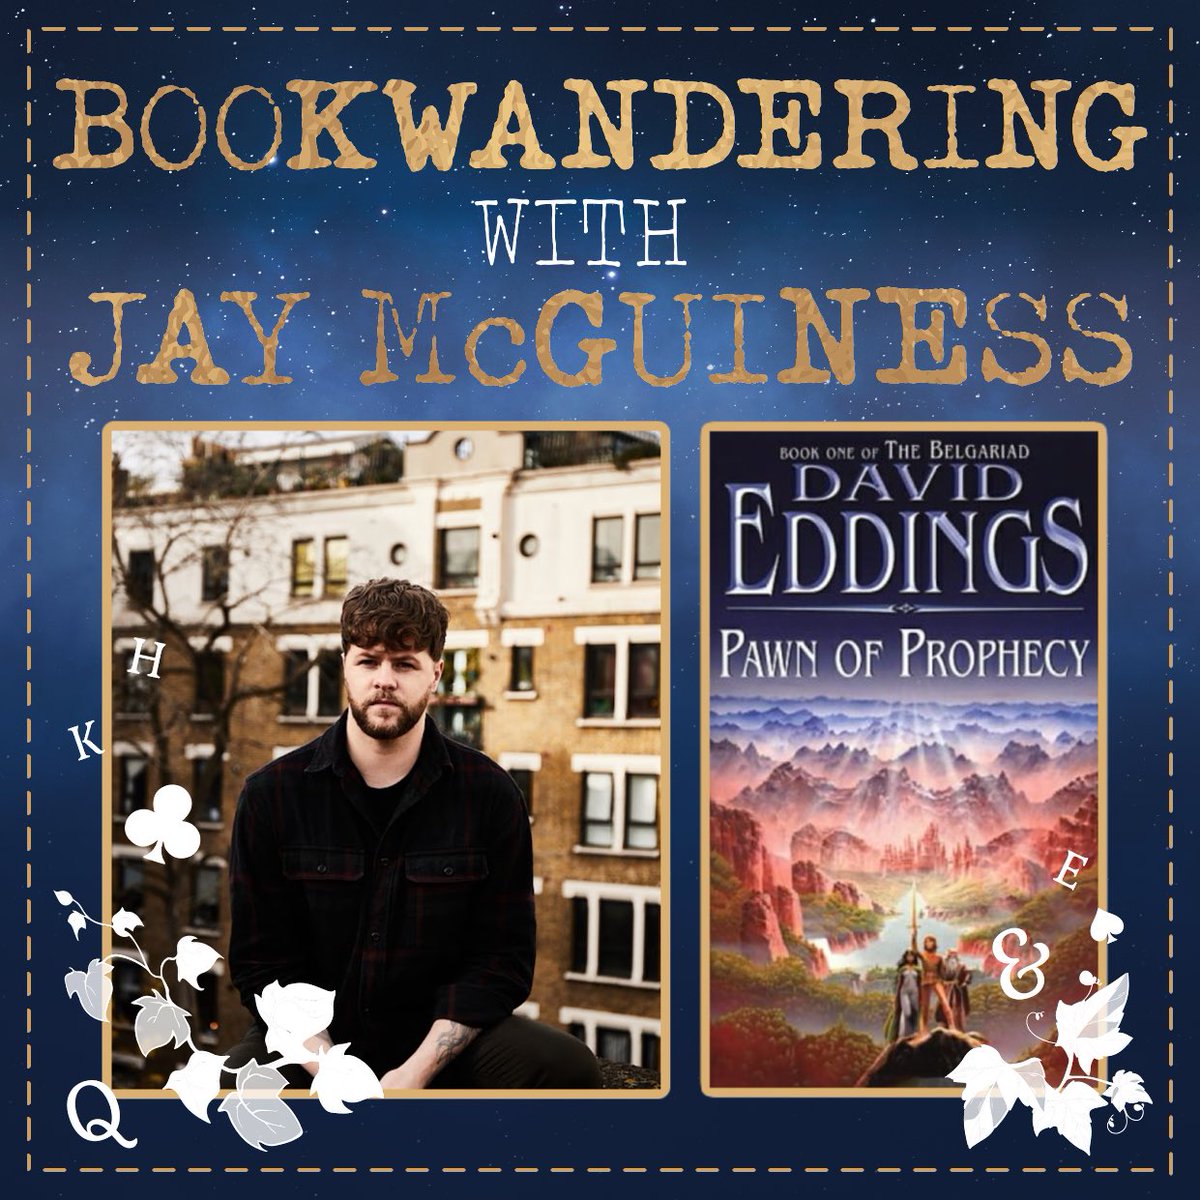 Last episode of series two of the pod and it’s a good one! I chatted to @JayMcGuiness about Pawn of Prophecy and Jay’s debut YA novel, Blood Flowers which is out in Feb. Live across platforms! podcasts.apple.com/gb/podcast/boo…